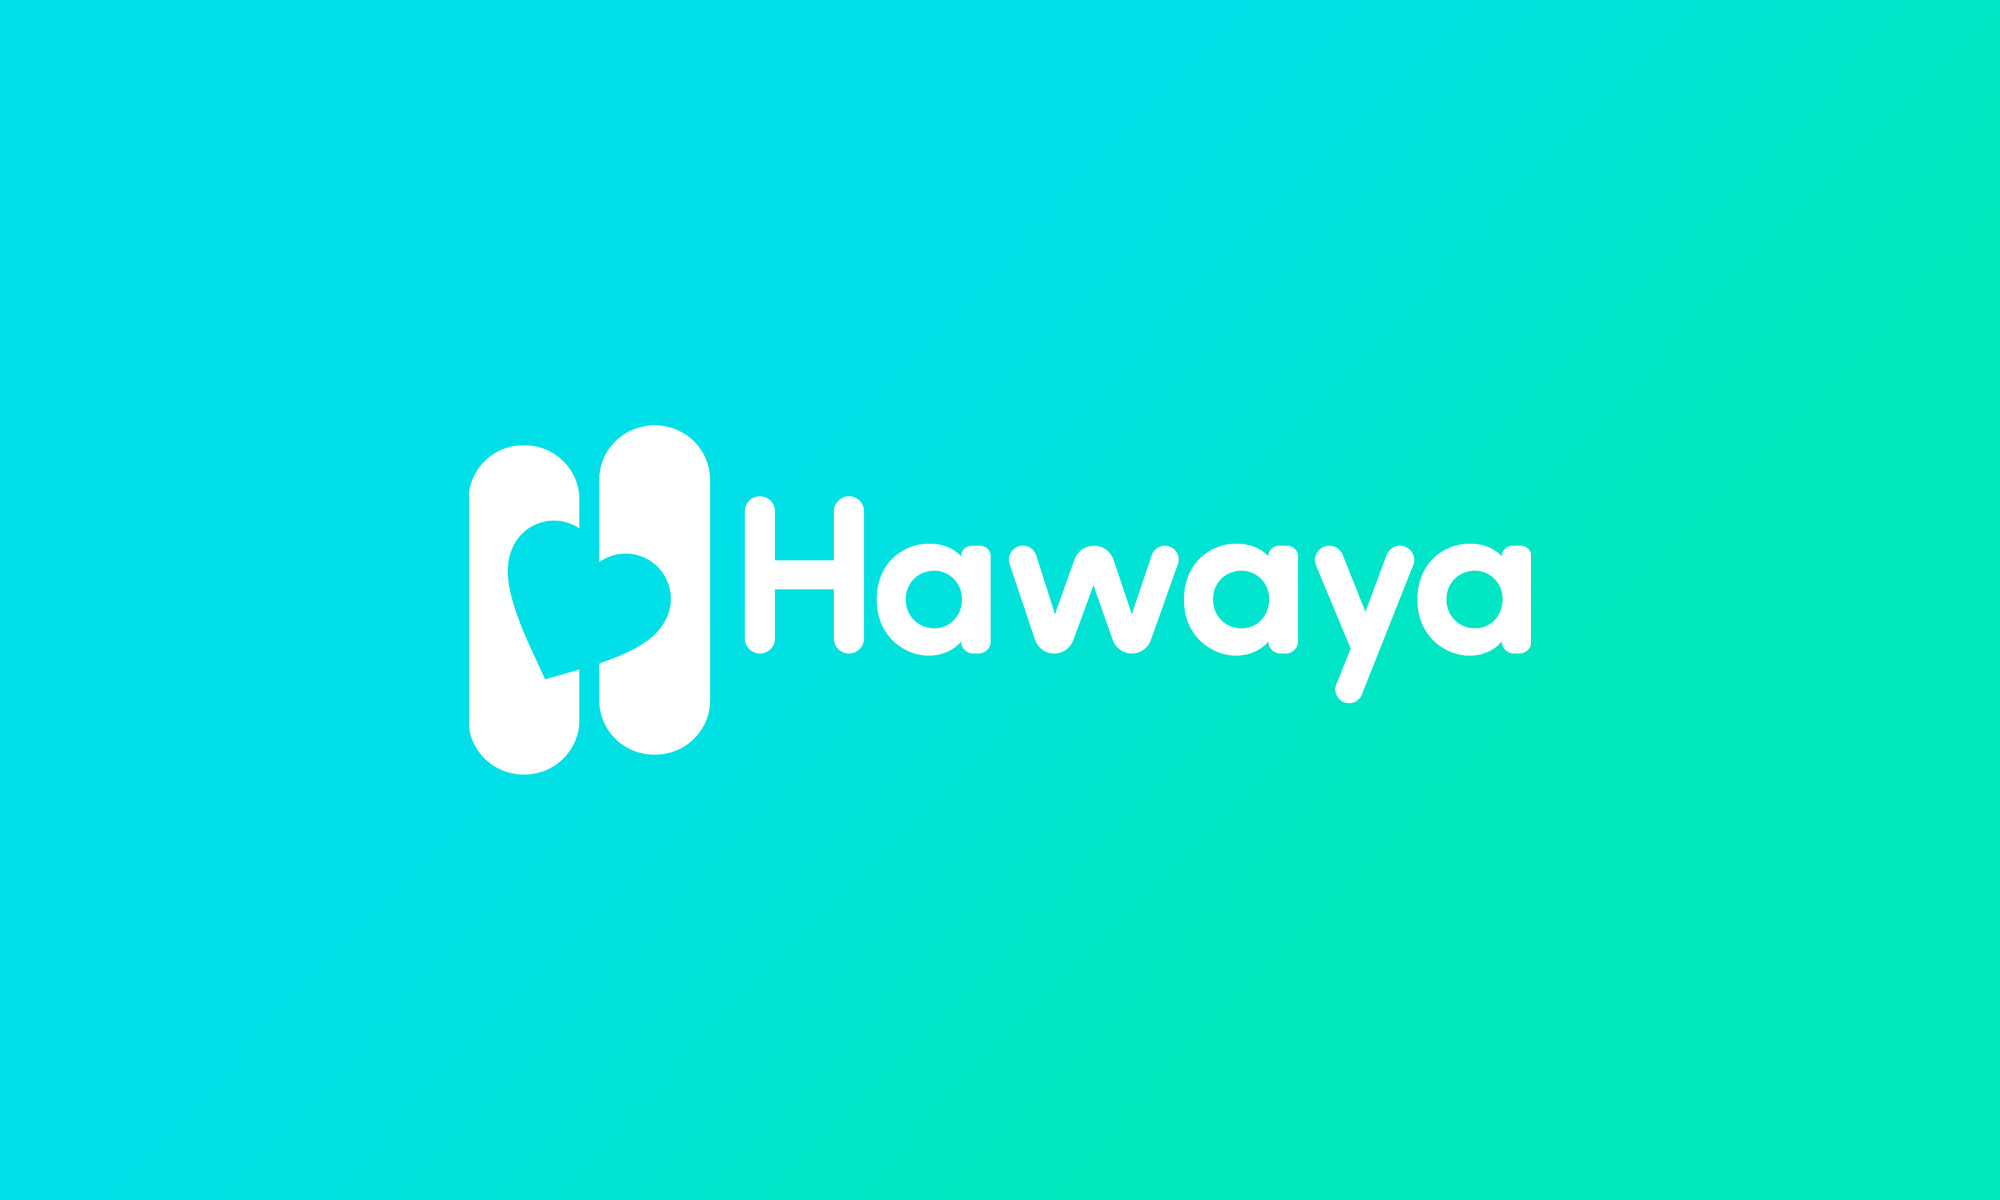 egyptian matchmaking app hawaya lets users connect based on lifestyle choices